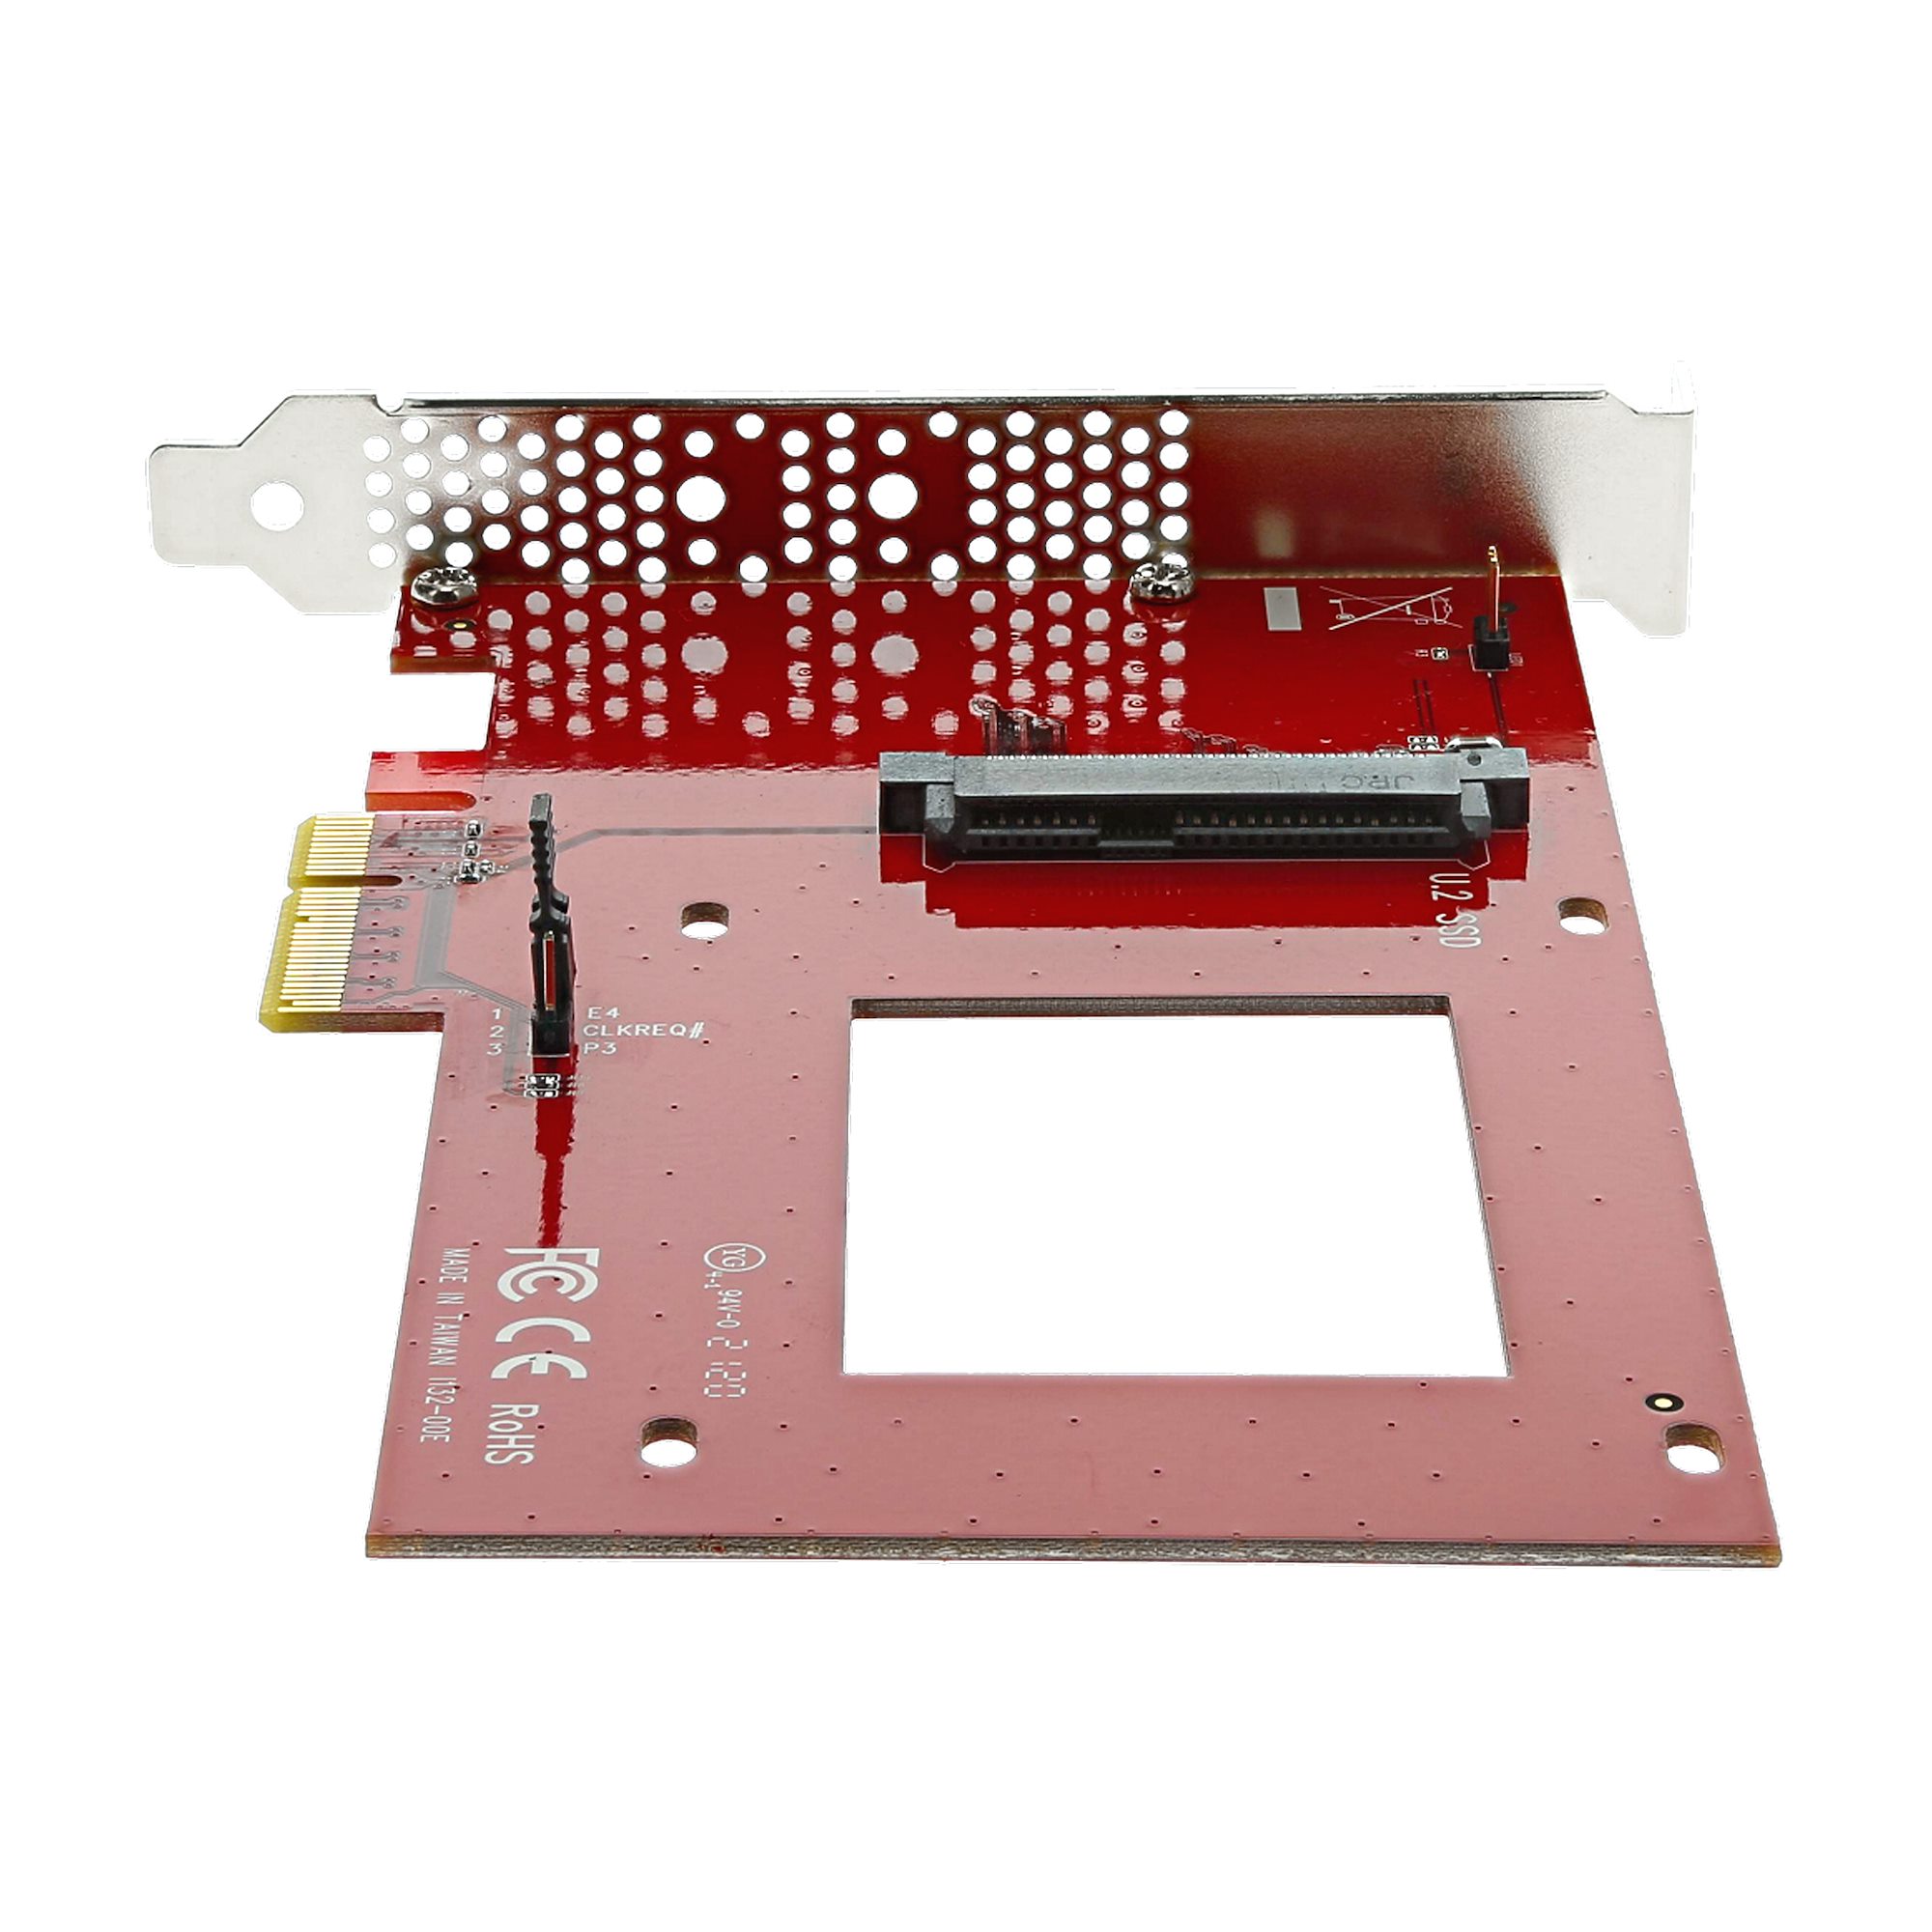  Buy StarTech.com U.2 to PCIe Adapter - x4 PCIe - for